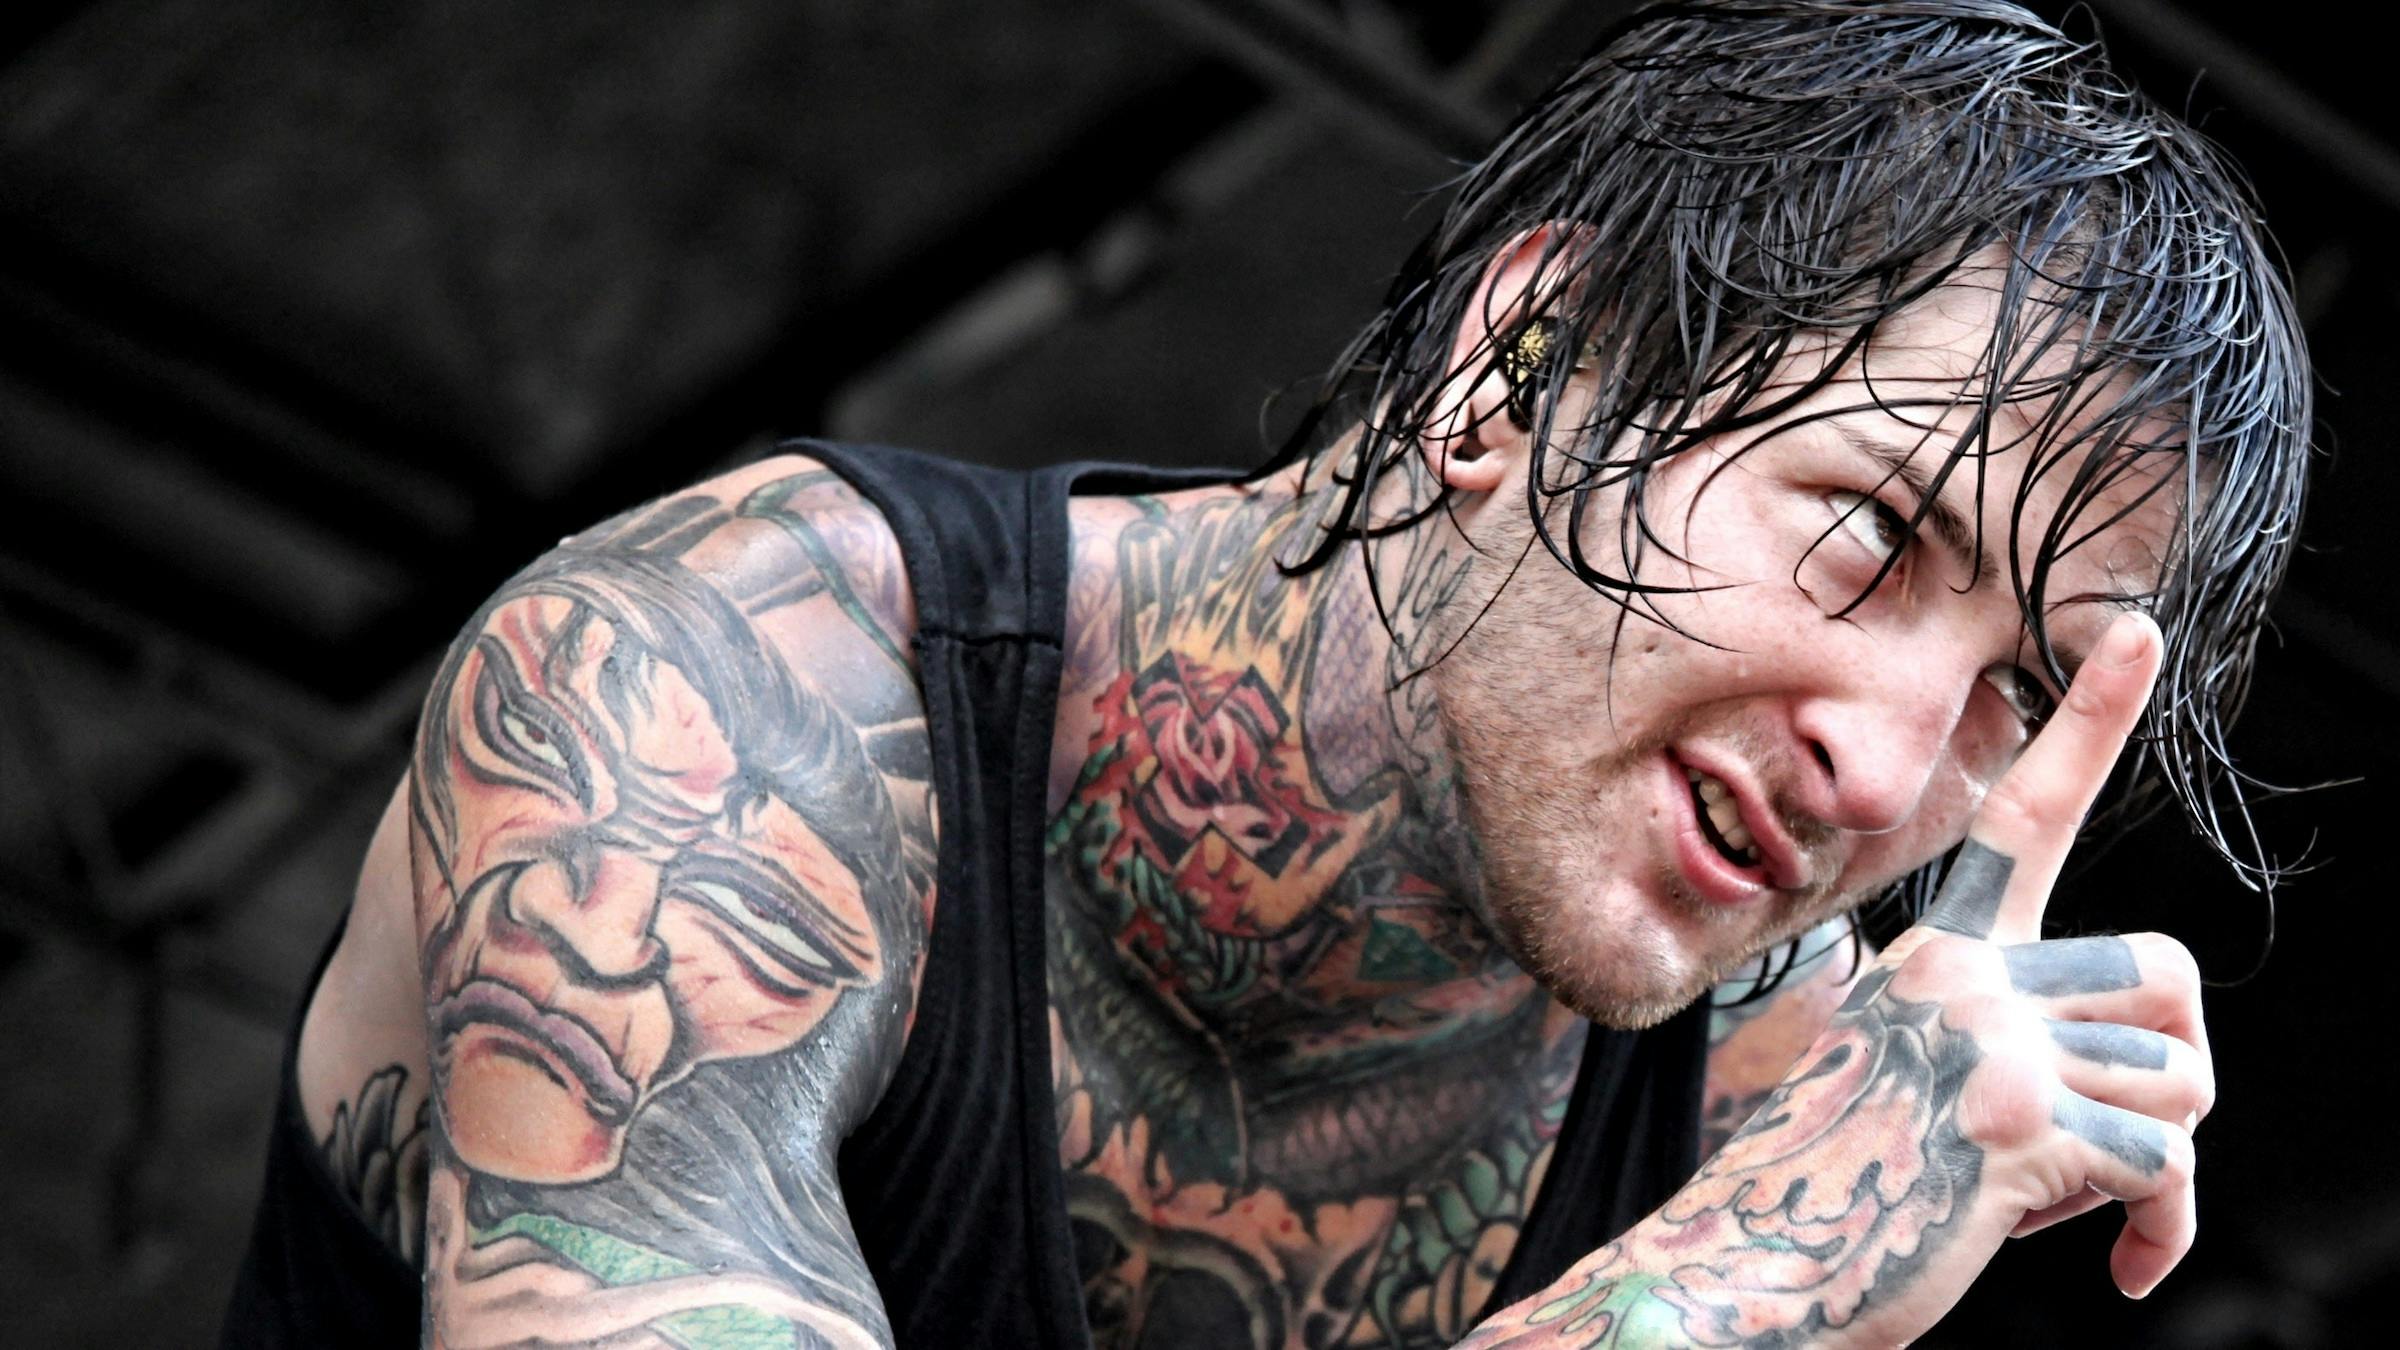 Remembering Mitch Lucker, Eight Years Later